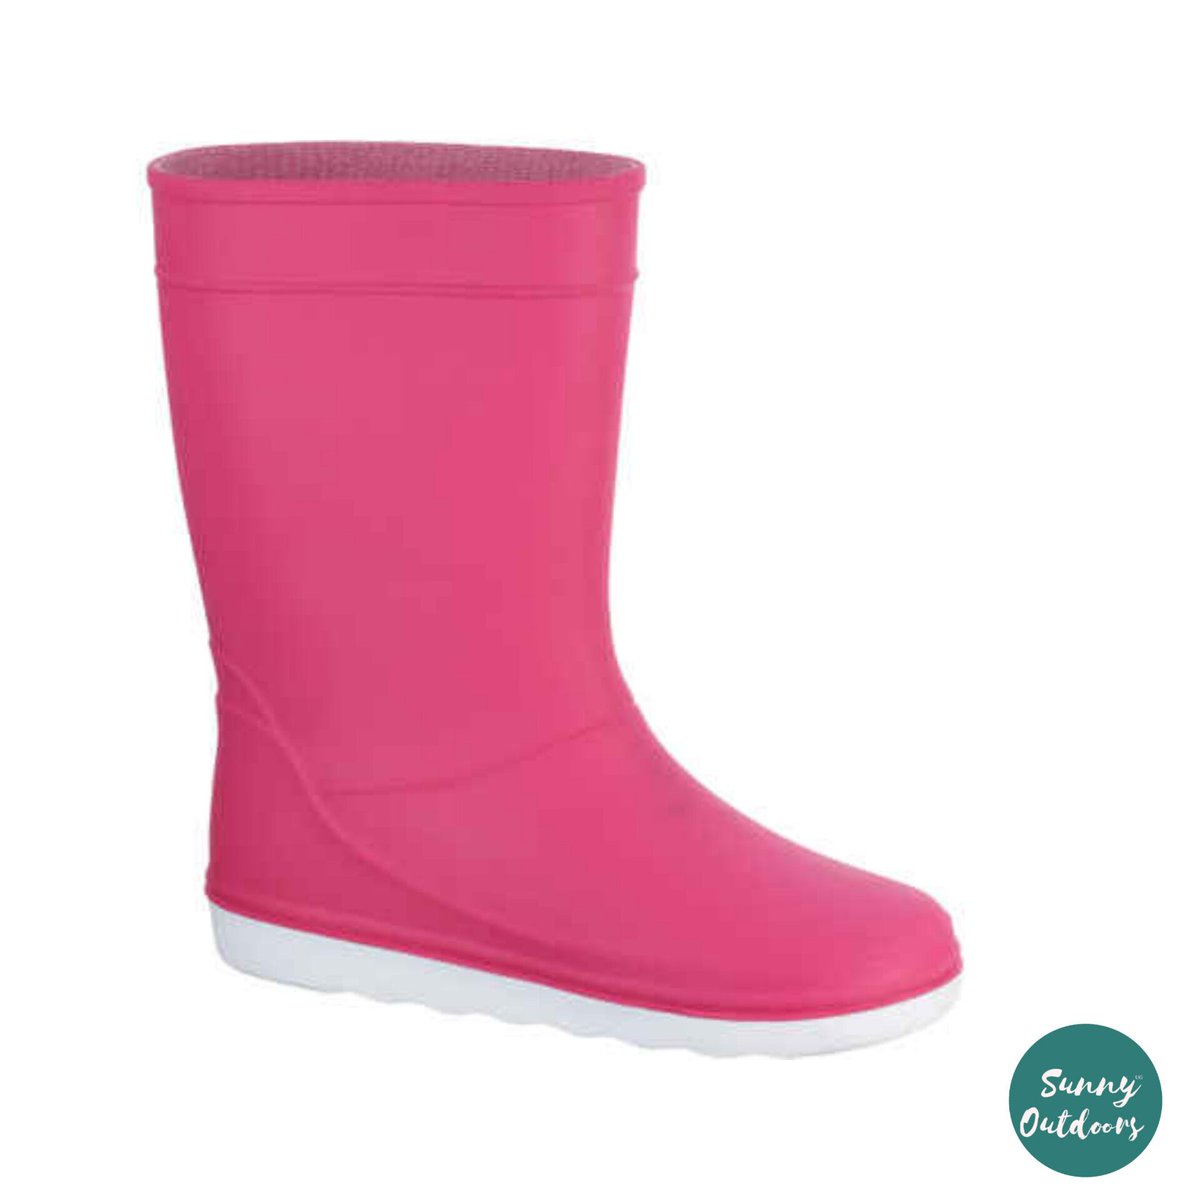 Be prepared for a rainy-day adventure with these Kids' Rain Boots 100! They're waterproof and flexible, with a grooved sole for good drainage and a removable insole for extra cushioning.They feature a wide neck for easy on-and-off, ensuring dry and stylish comfort for kids of all…